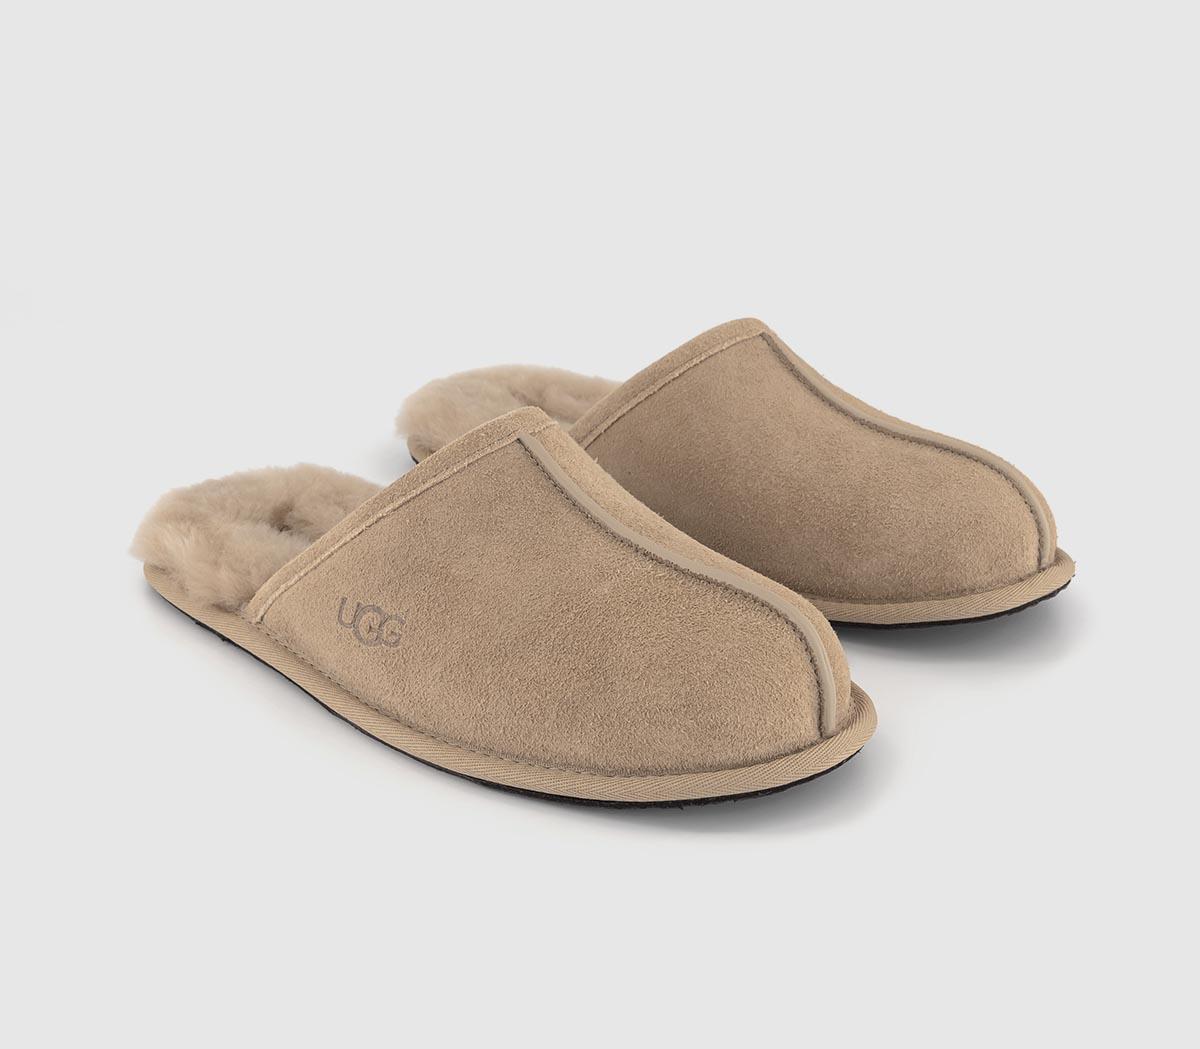 UGG Mens Scuff Slippers Sand Natural, 8